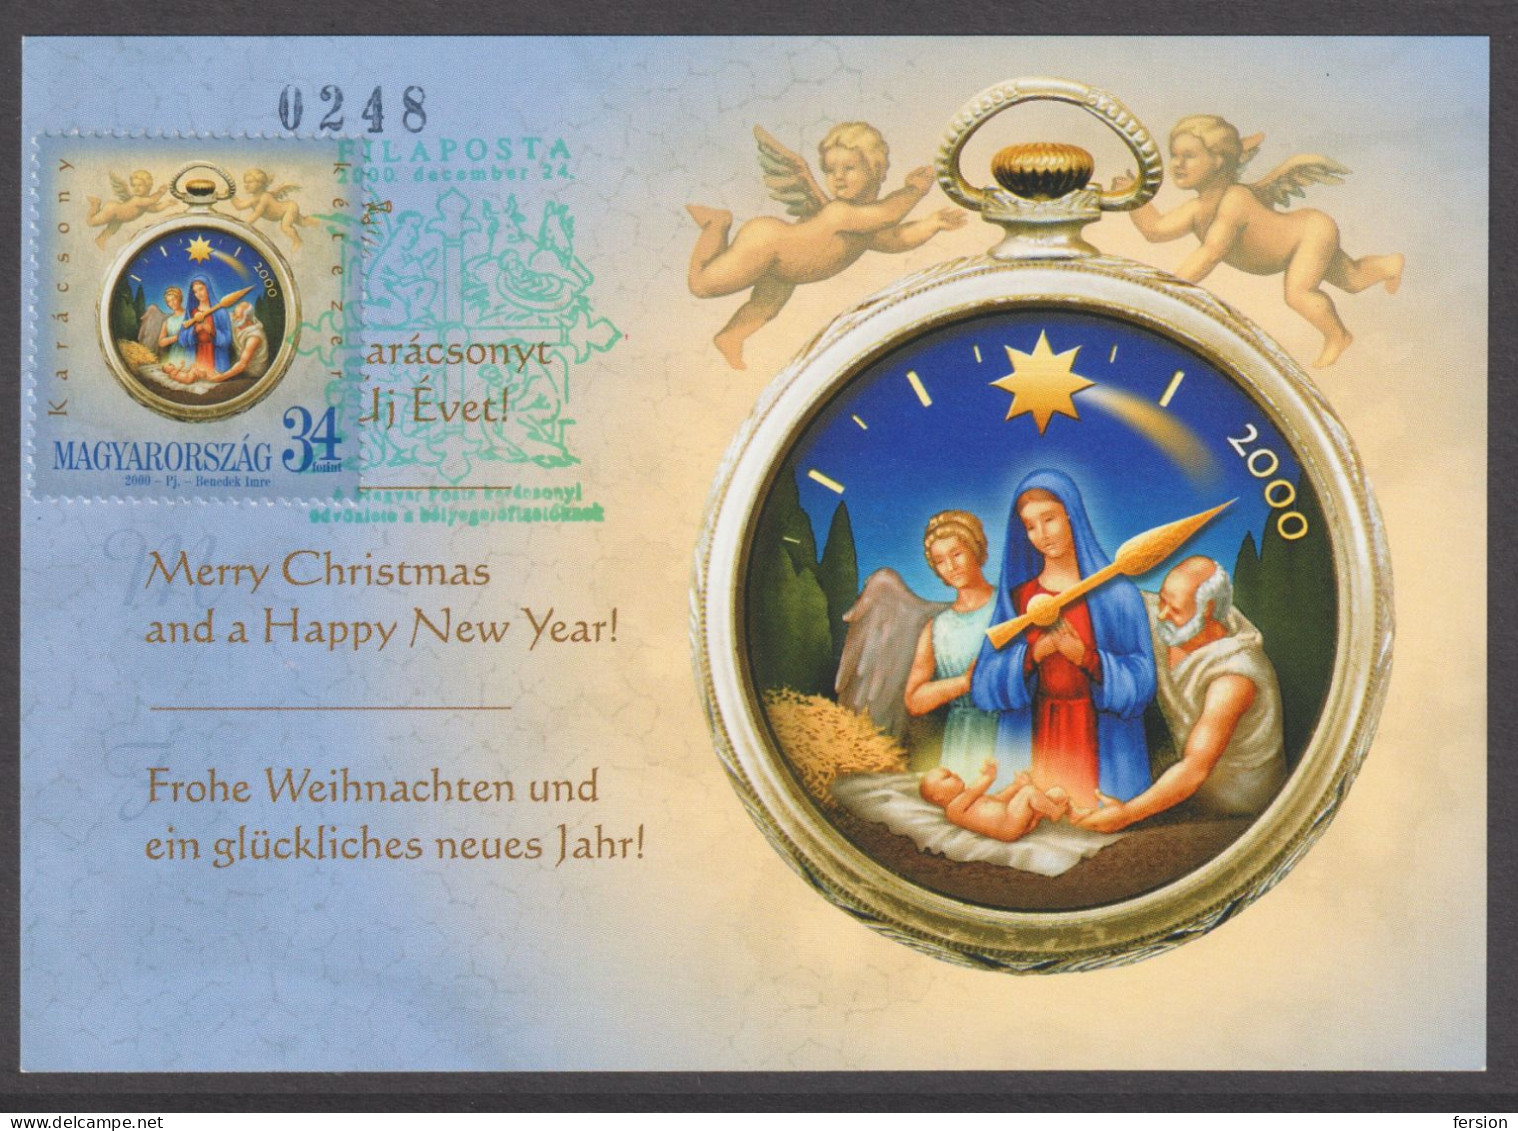 CHRISTMAS Gift POSTCARD For Stamp Collectors Subscriber RRR Clock Jesus Mary 2000 Hungary FILAPOSTA FDC Postmark - Weihnachten